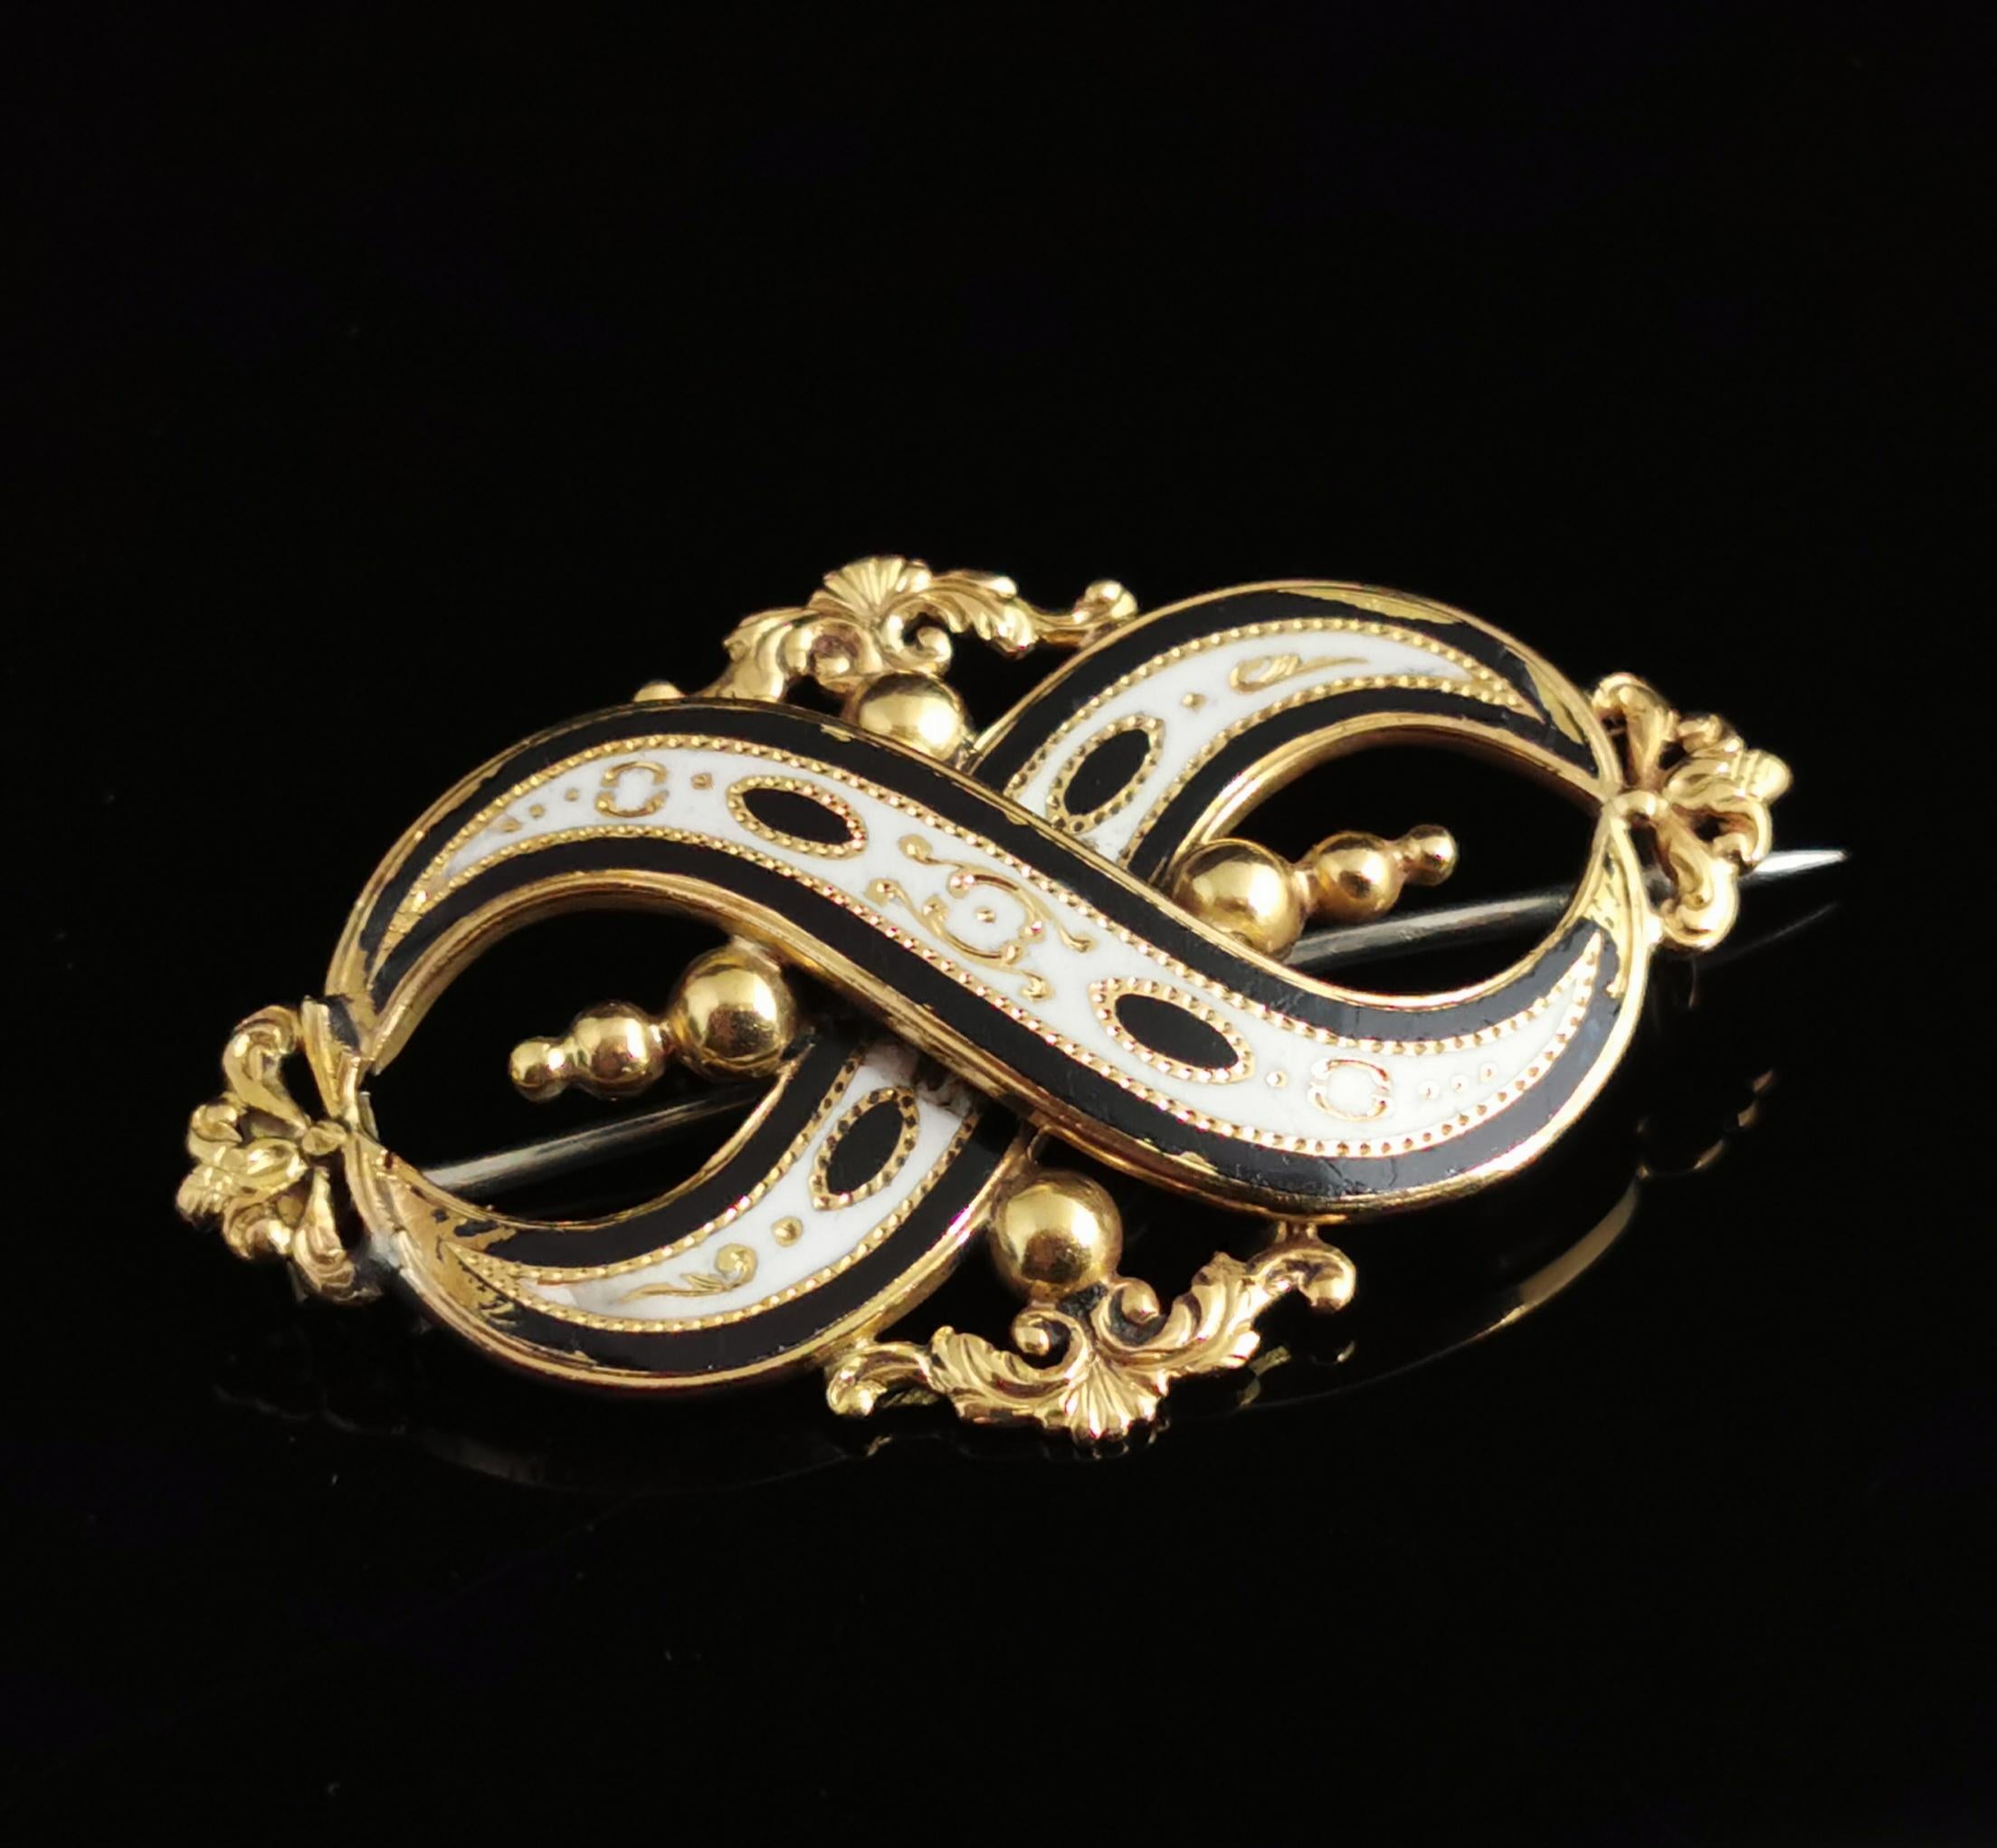 Antique Victorian Mourning Brooch, 15 Karat Yellow Gold, Black and White Enamel 10